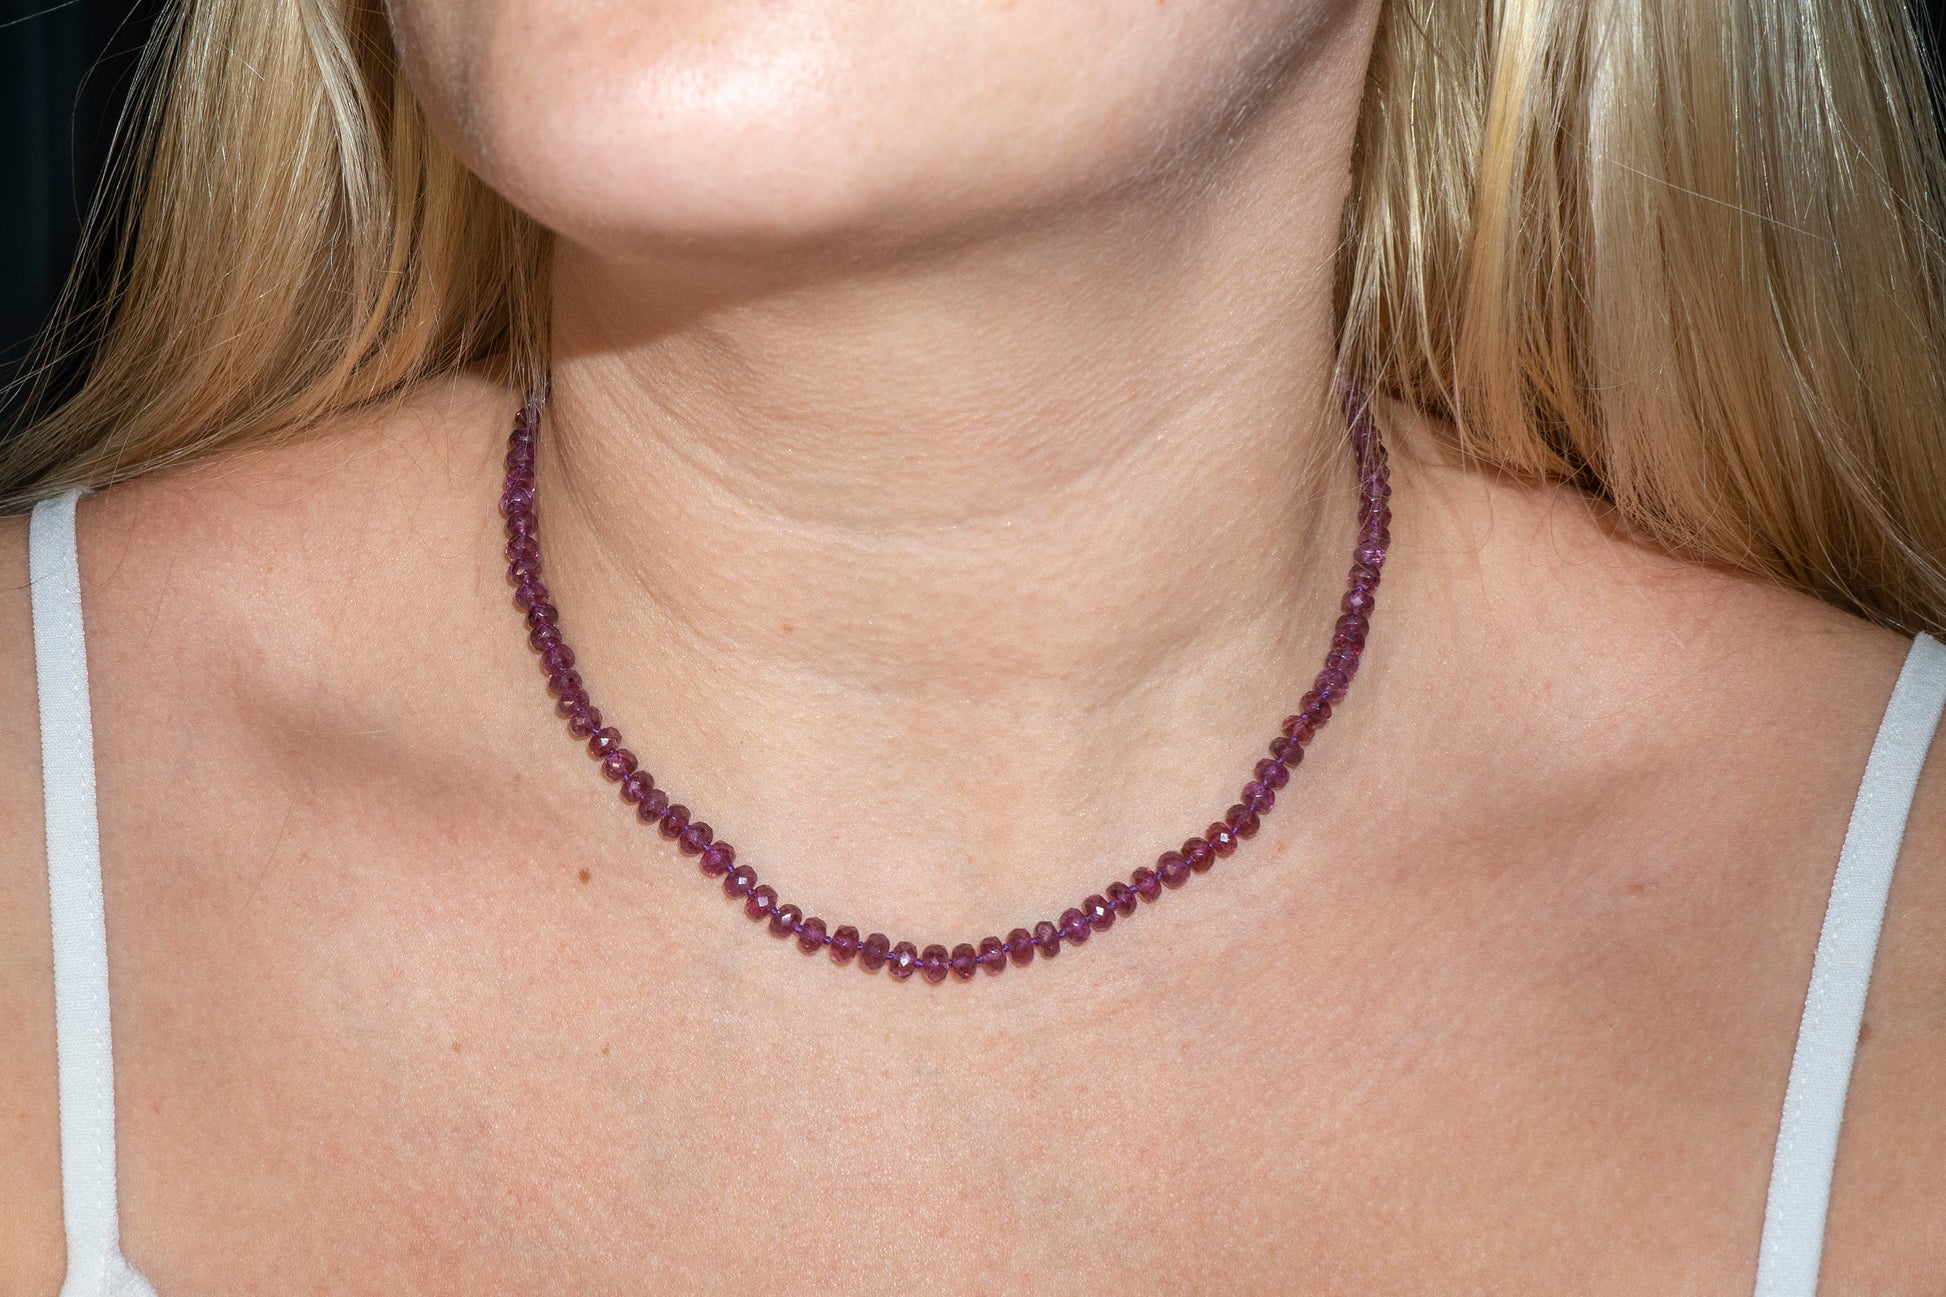 Malaia Garnet Beaded Candy Necklace collar silk knotted 14k